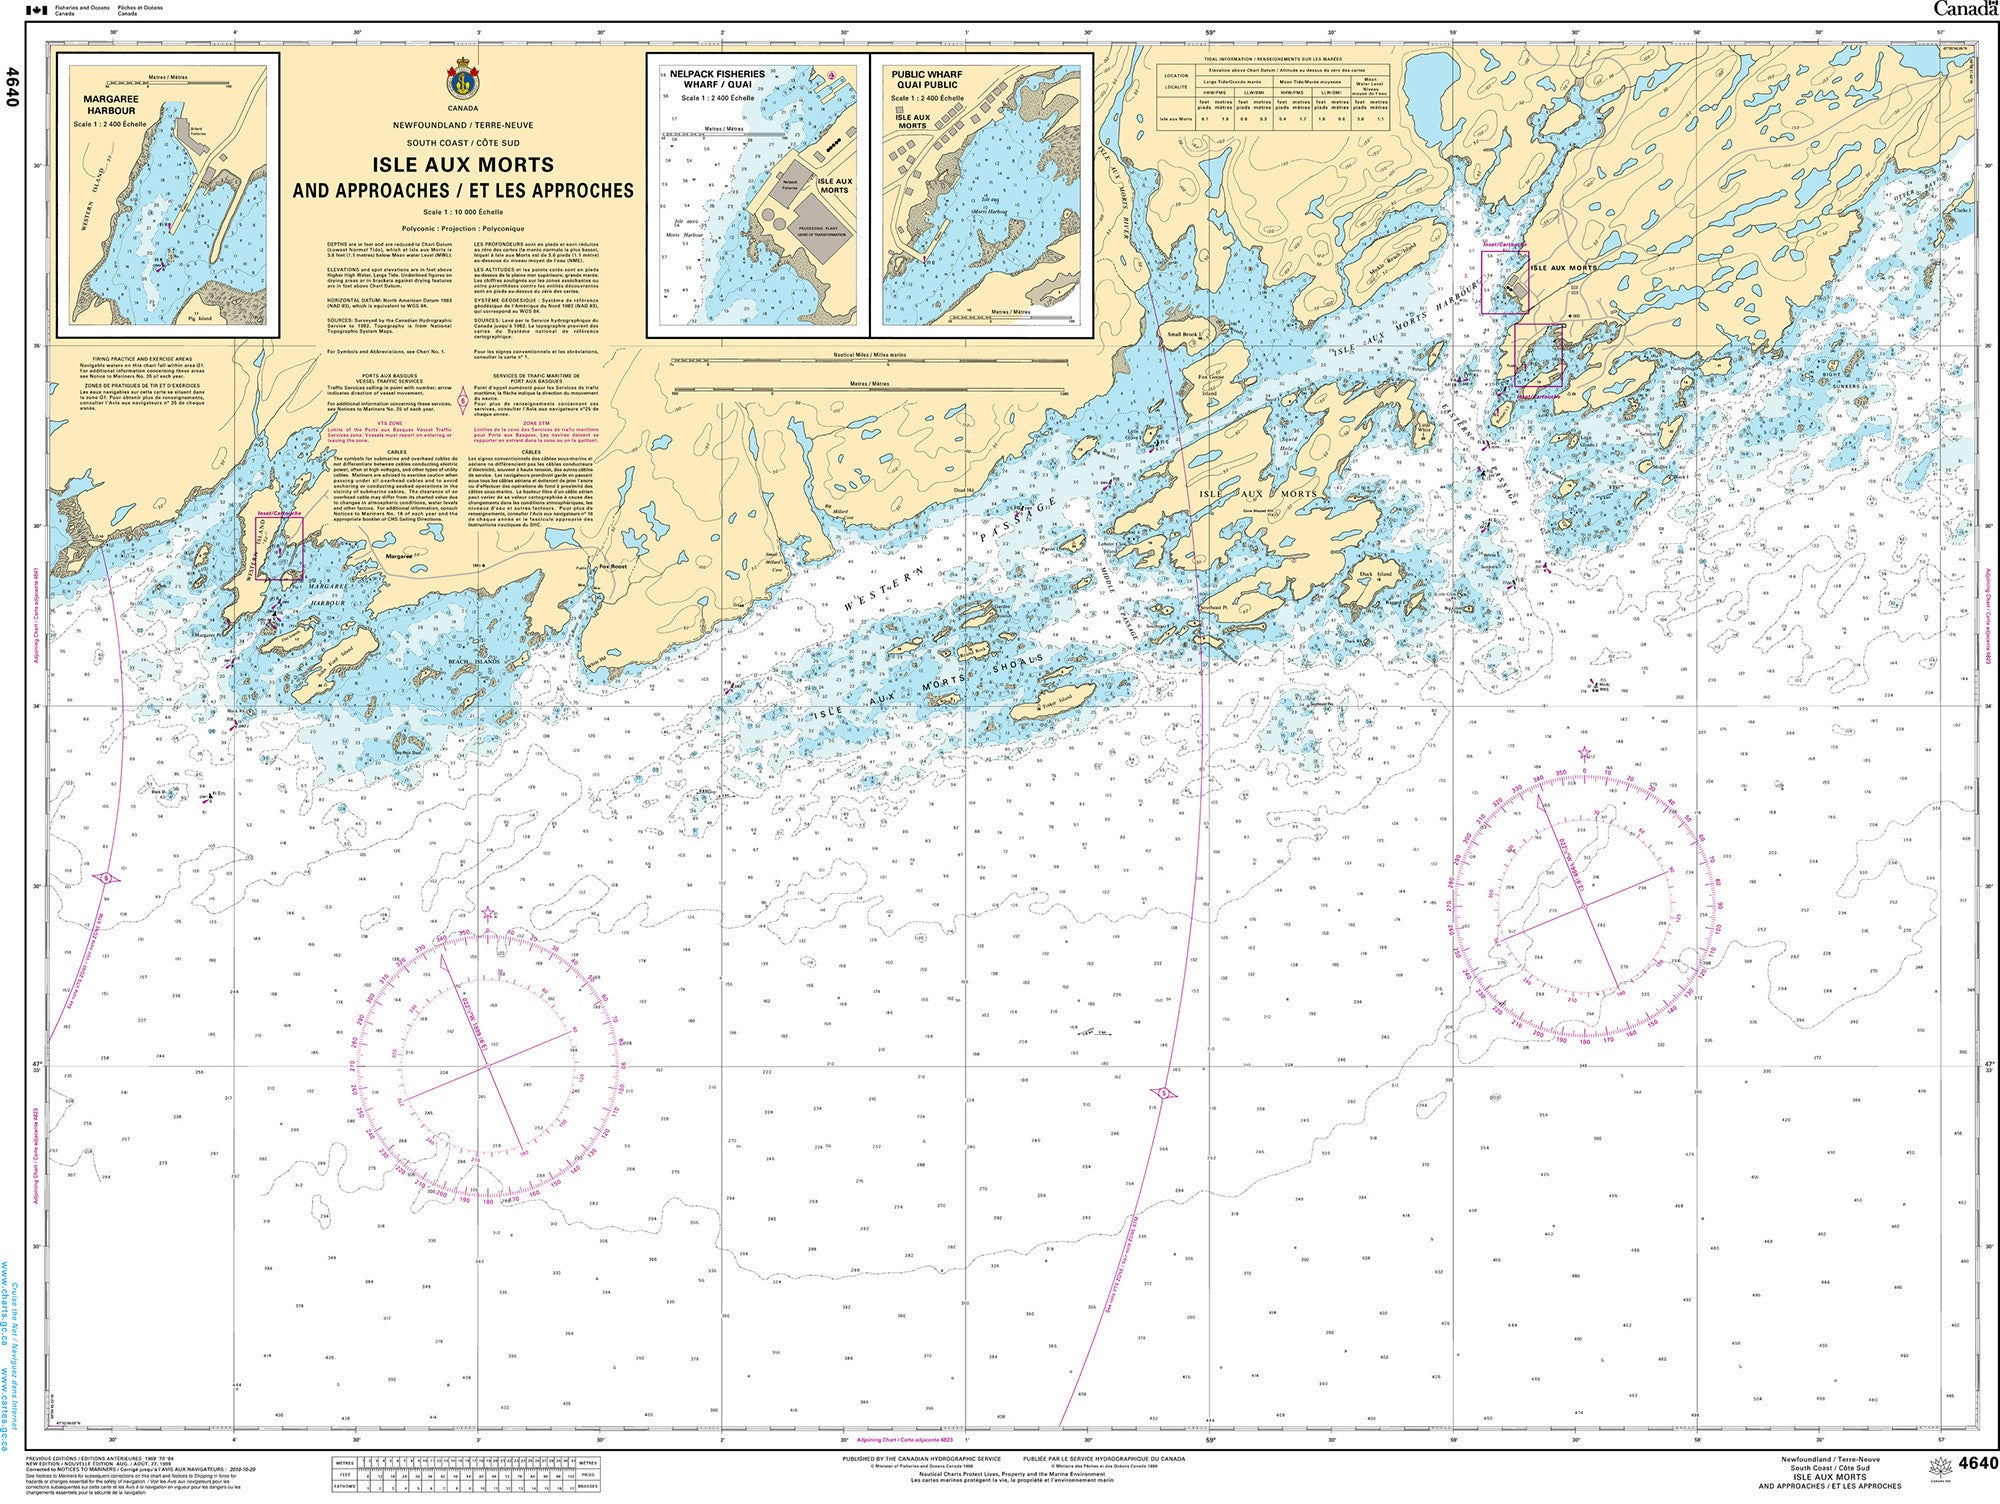 Canadian Hydrographic Service Nautical Chart CHS4640: Isle aux Morts and Approaches/et les approches